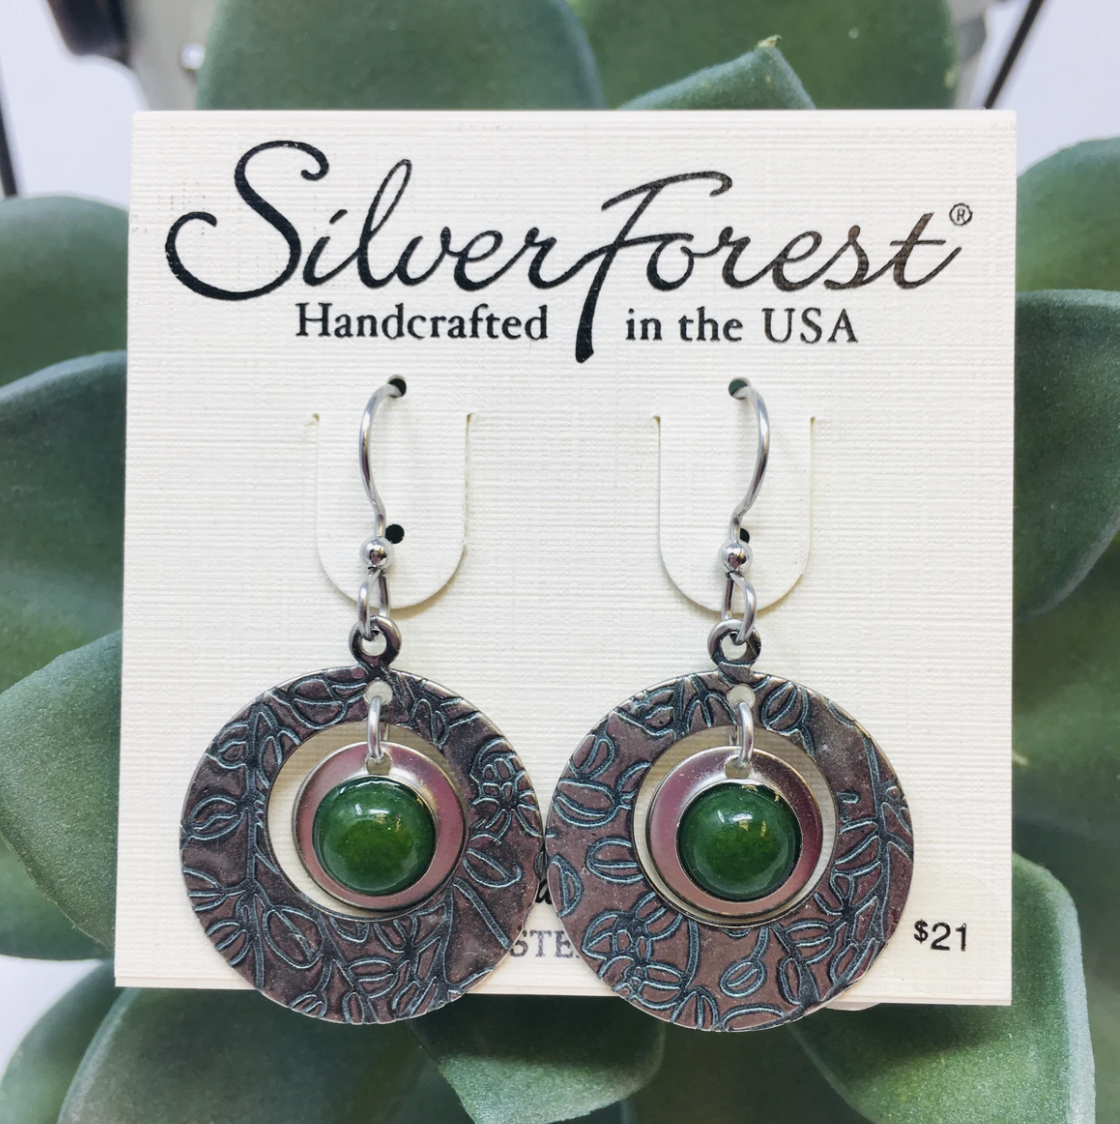 Green Stone In Textured Circle Earrings - Silver Forest